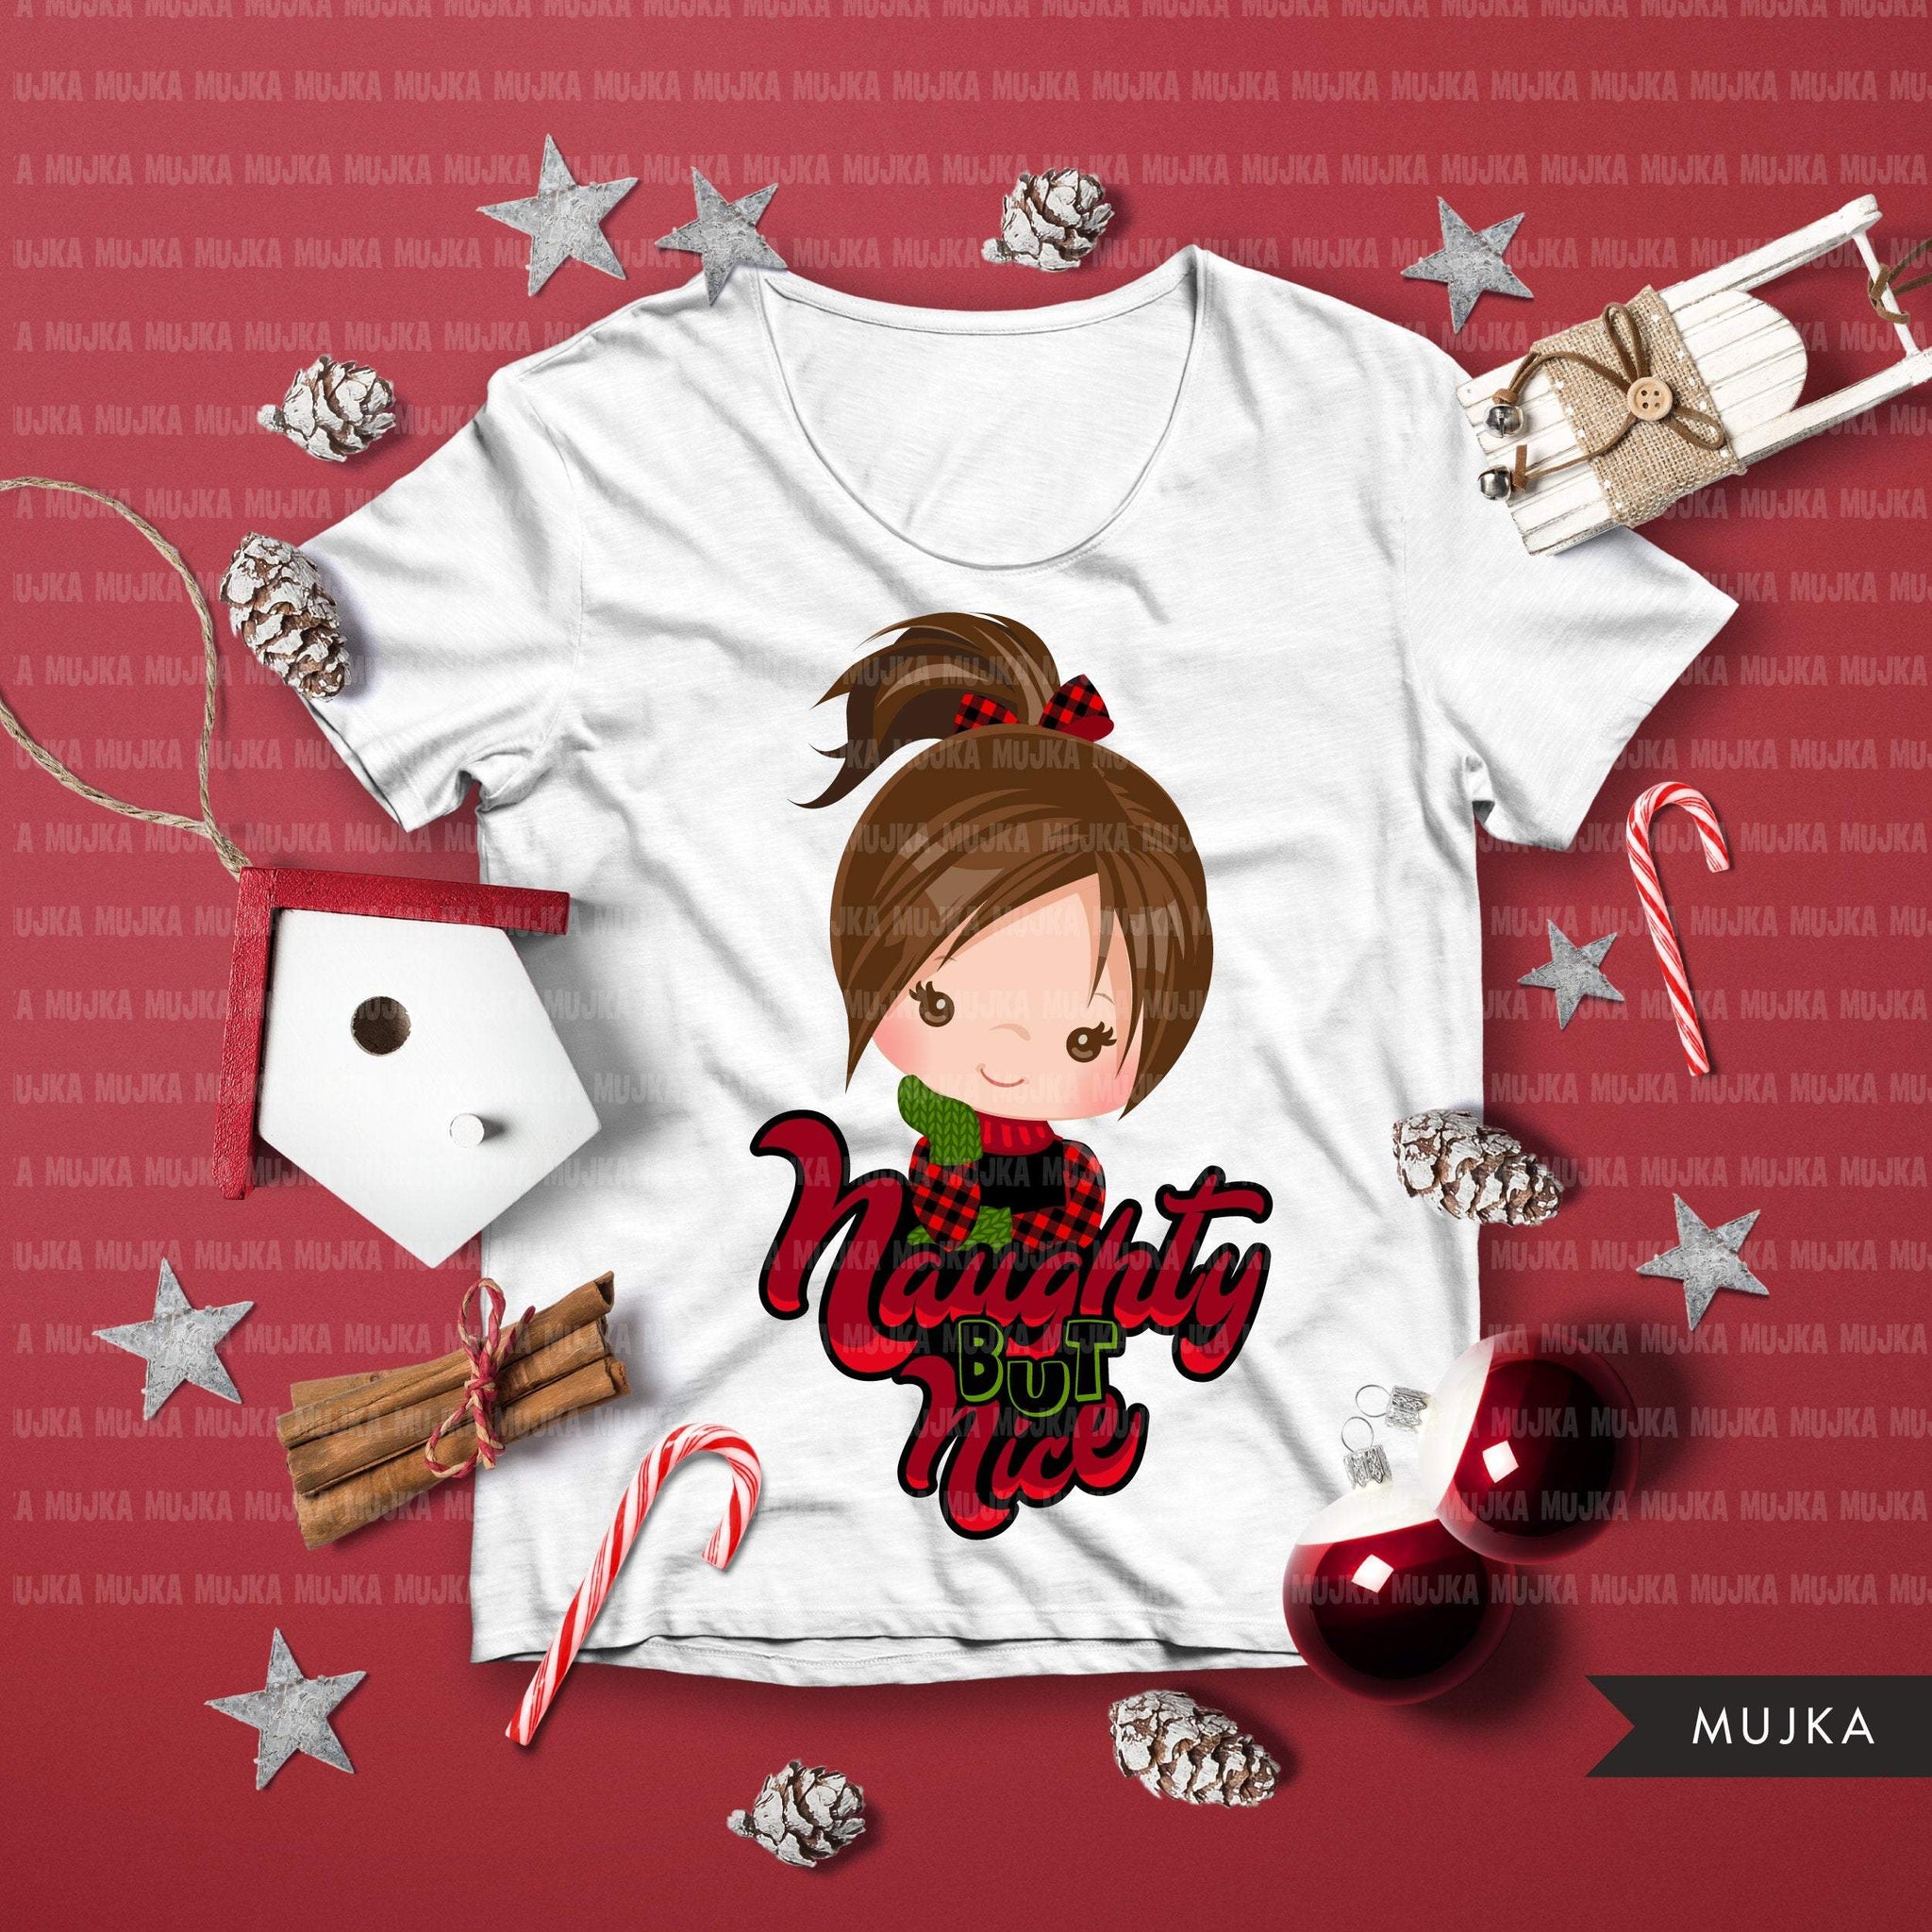 Christmas PNG digital, Naughty but Nice HTV sublimation image transfer clipart, t-shirt graphics brunette girls